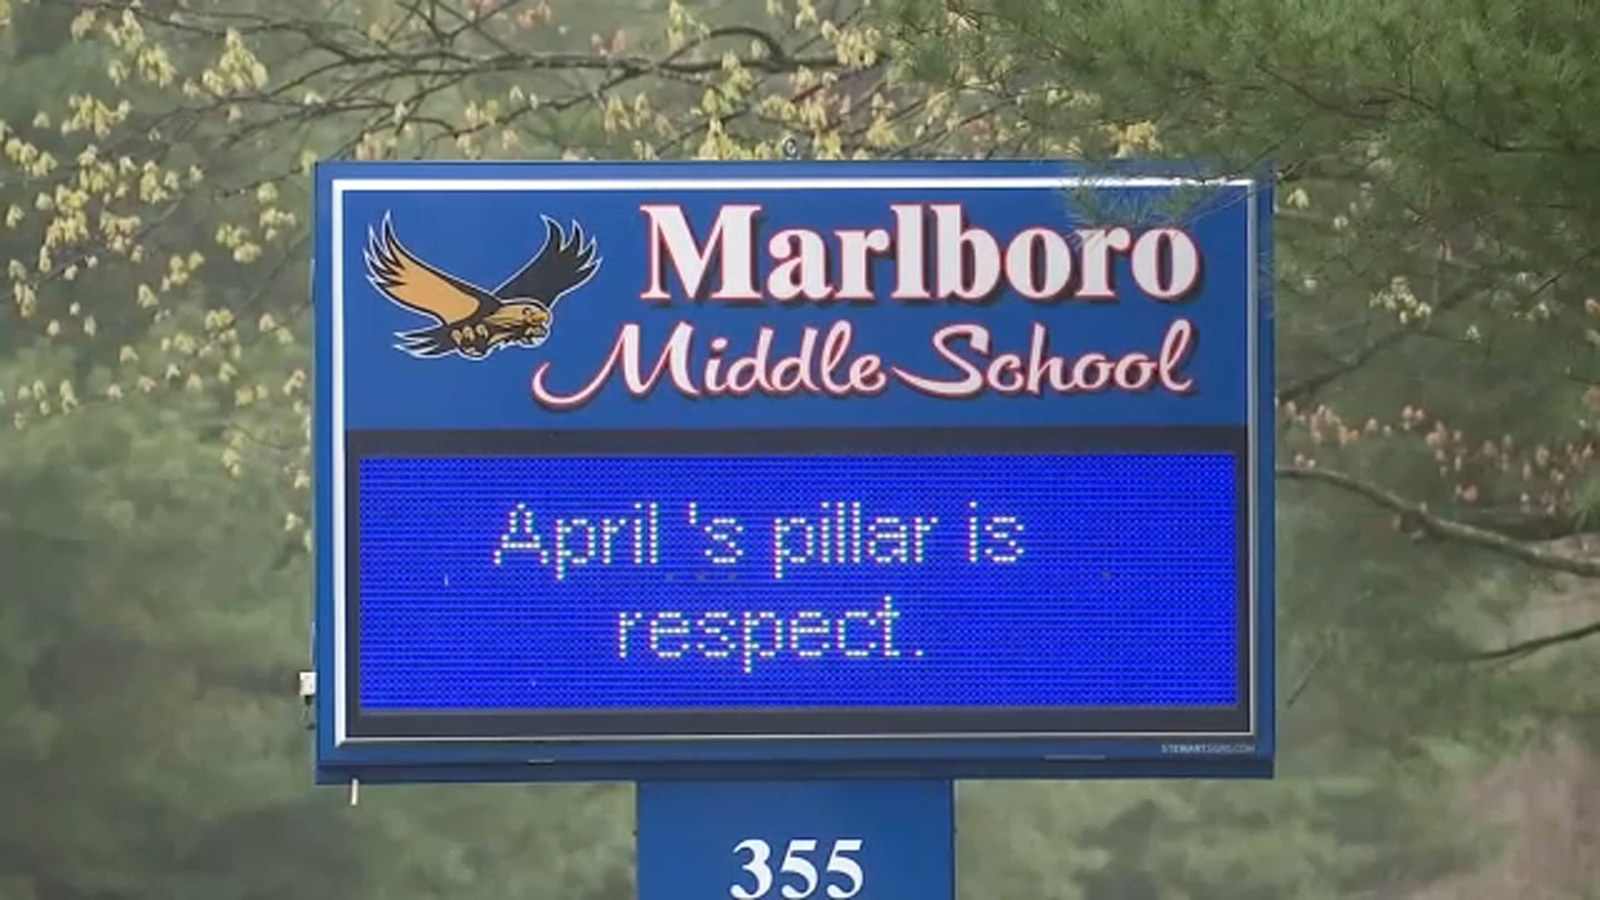 Marlboro bomb threat: New Jersey town’s public schools back in session after Thursday closure [Video]